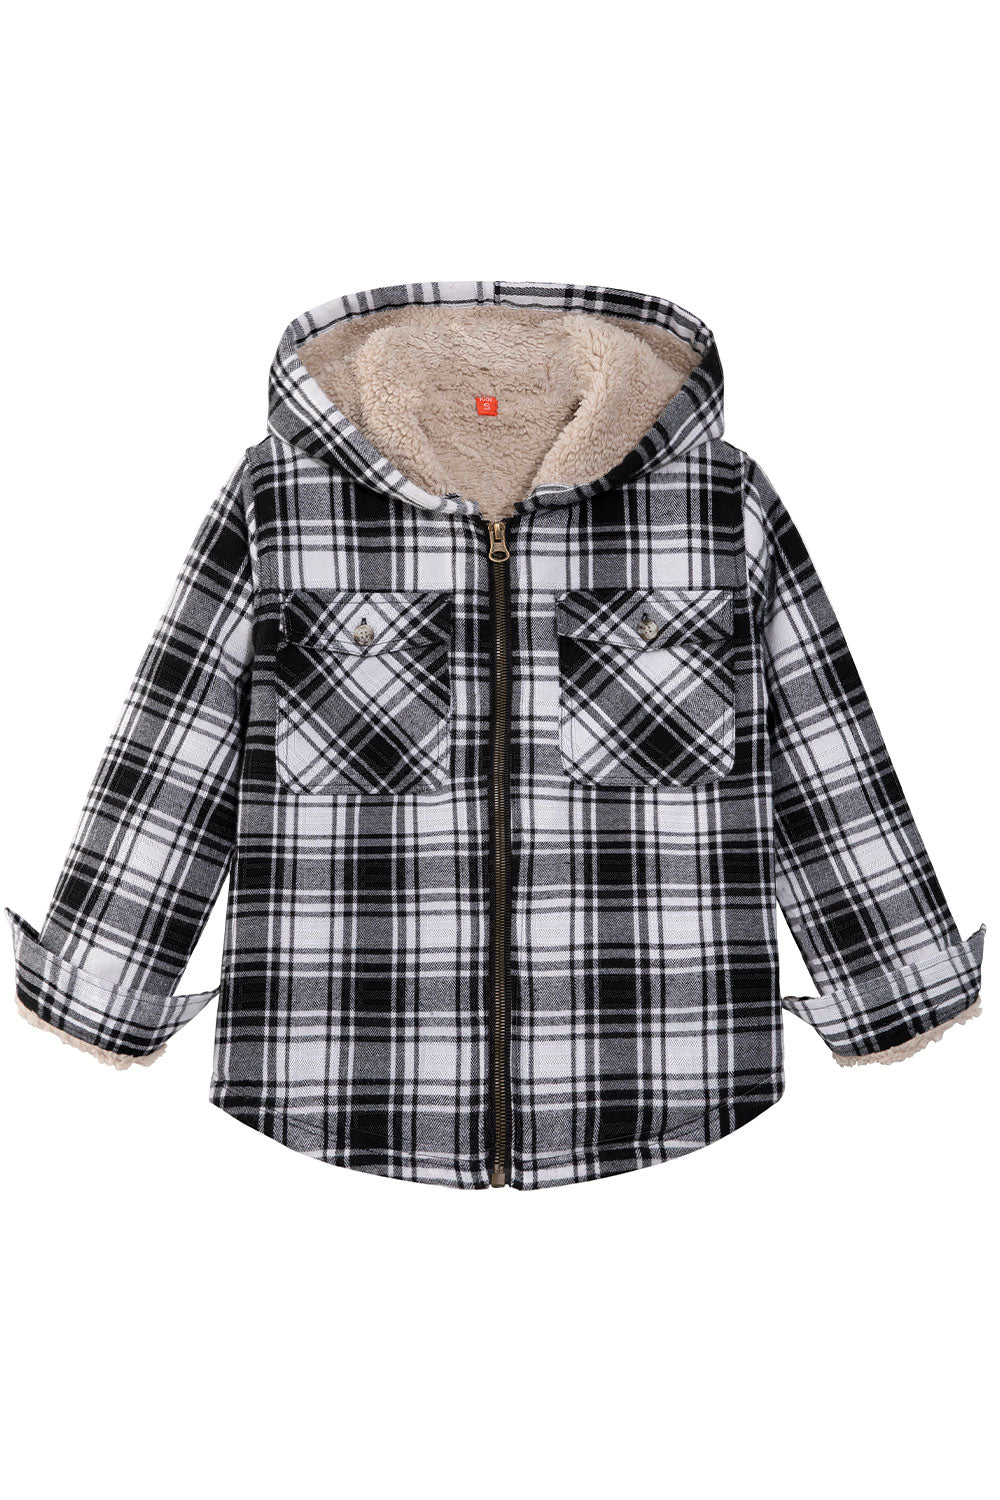 Kids Matching Family Black White Hooded Flannel Jacket